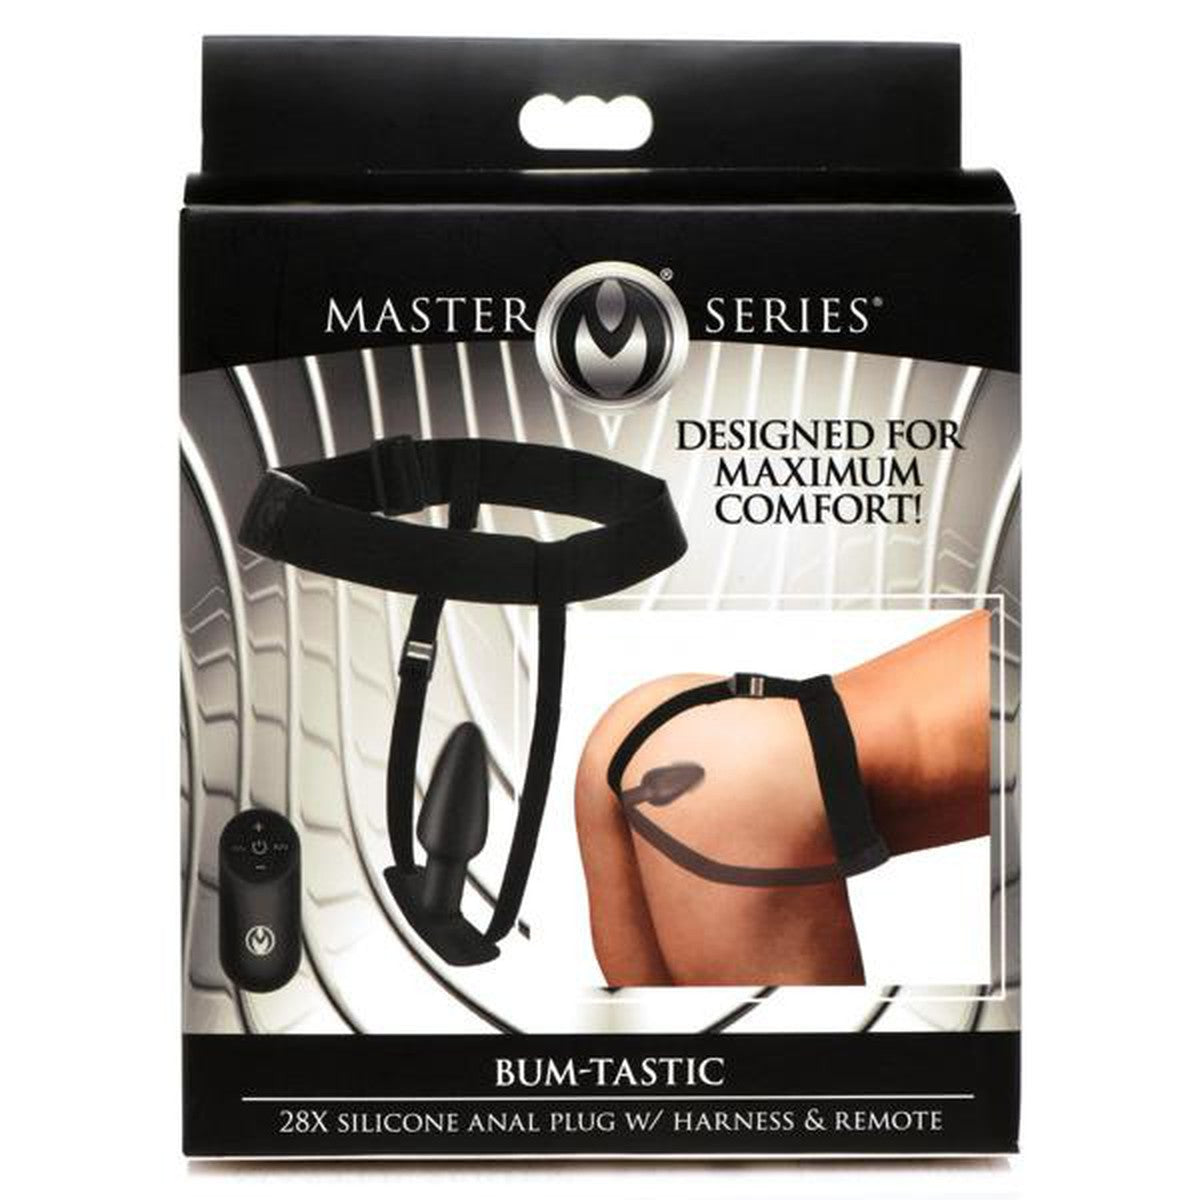 Bum-tastic 28x Silicone Anal Plug With Comfort Harness And Remote Control